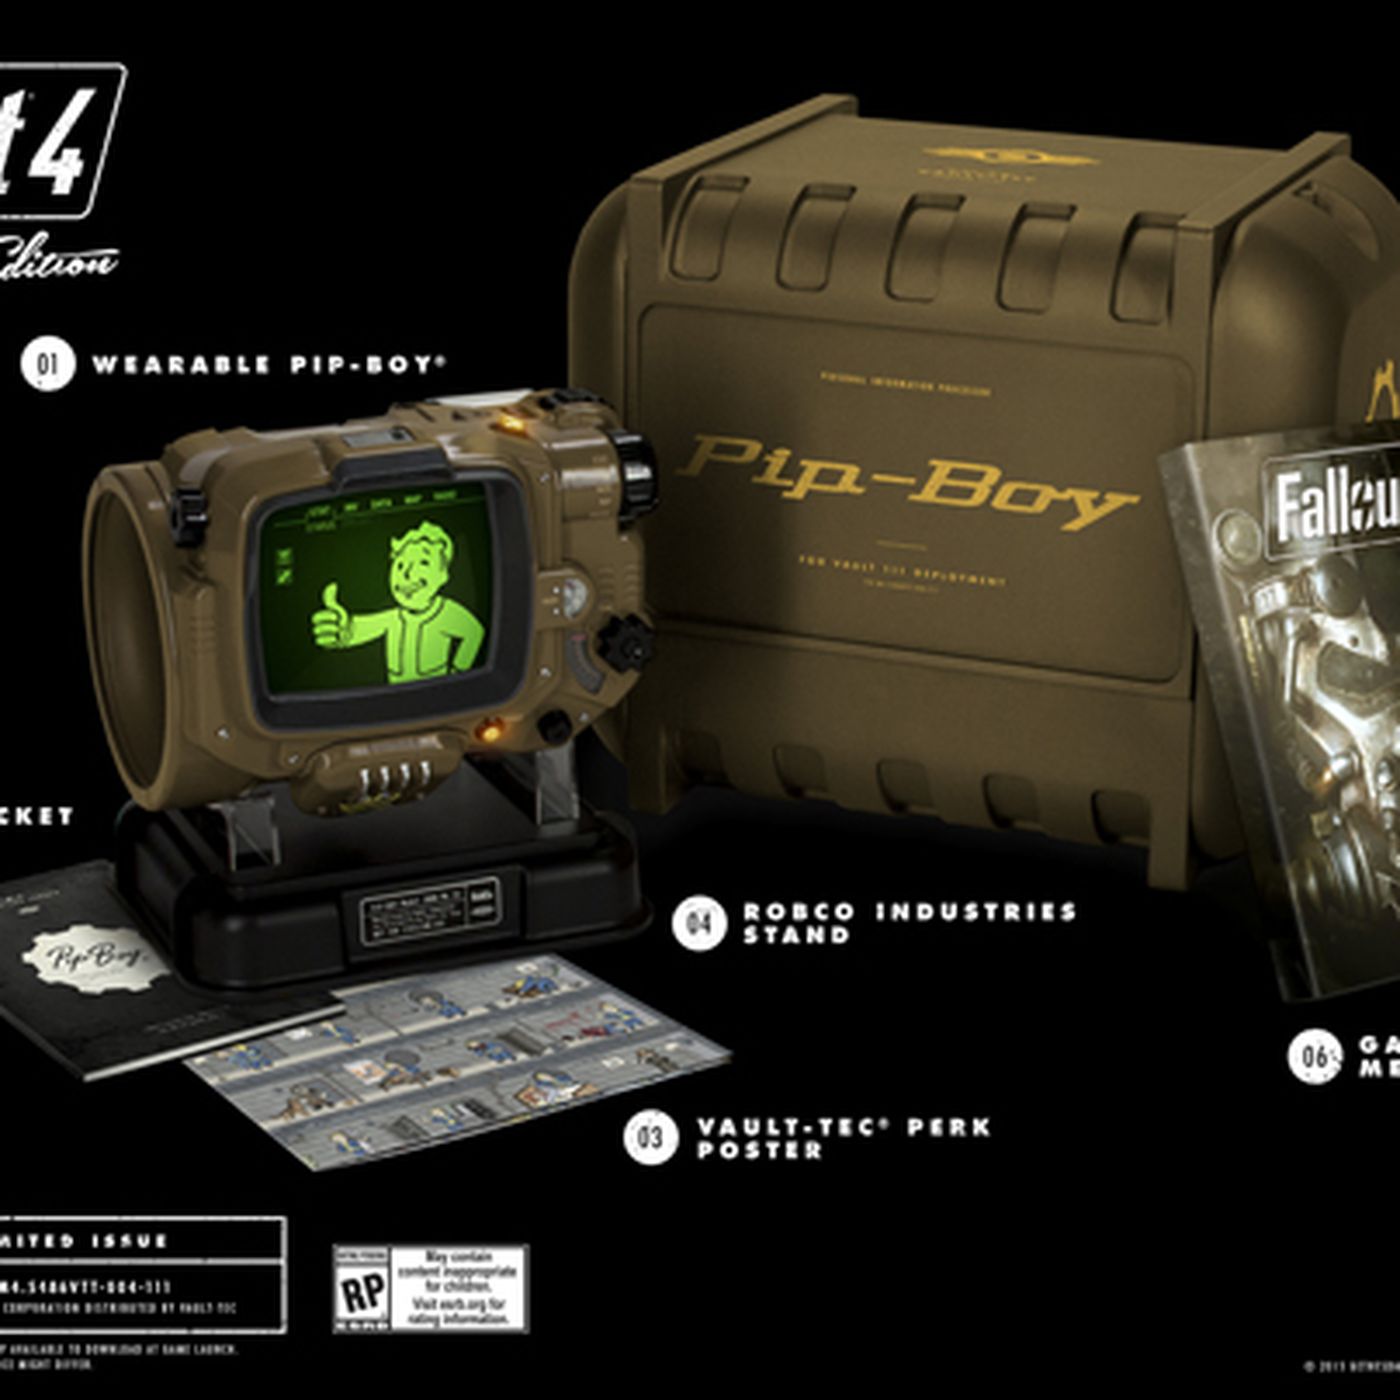 Omtrek lawaai ophouden Xbox One Fallout 4 Pip-Boy Edition and Far Harbor Giveaway - Polygon